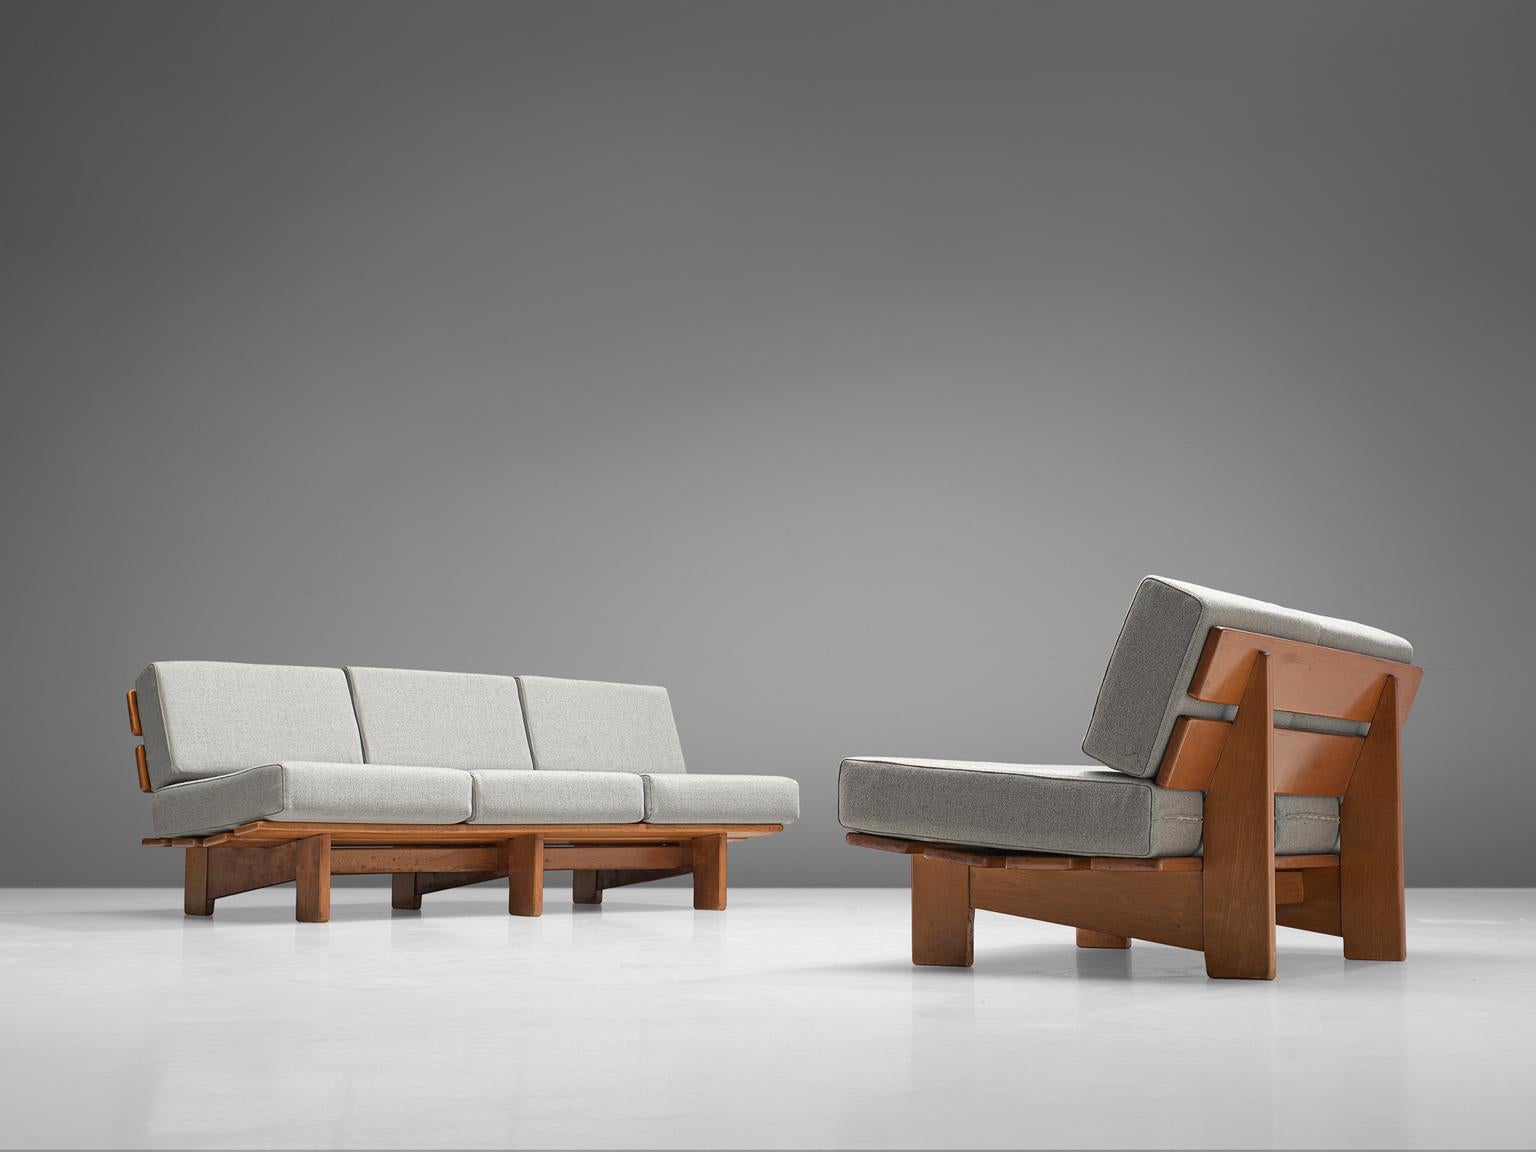 Three-seat sofa, oak and fabric, Europe, 1950s.

Modest and simplistic three-seat sofa made in the 1950s. This sofa is made of oak, the sofa is build up with two slats for the backrest and four as the seat. Comfortable grey cushions are placed on